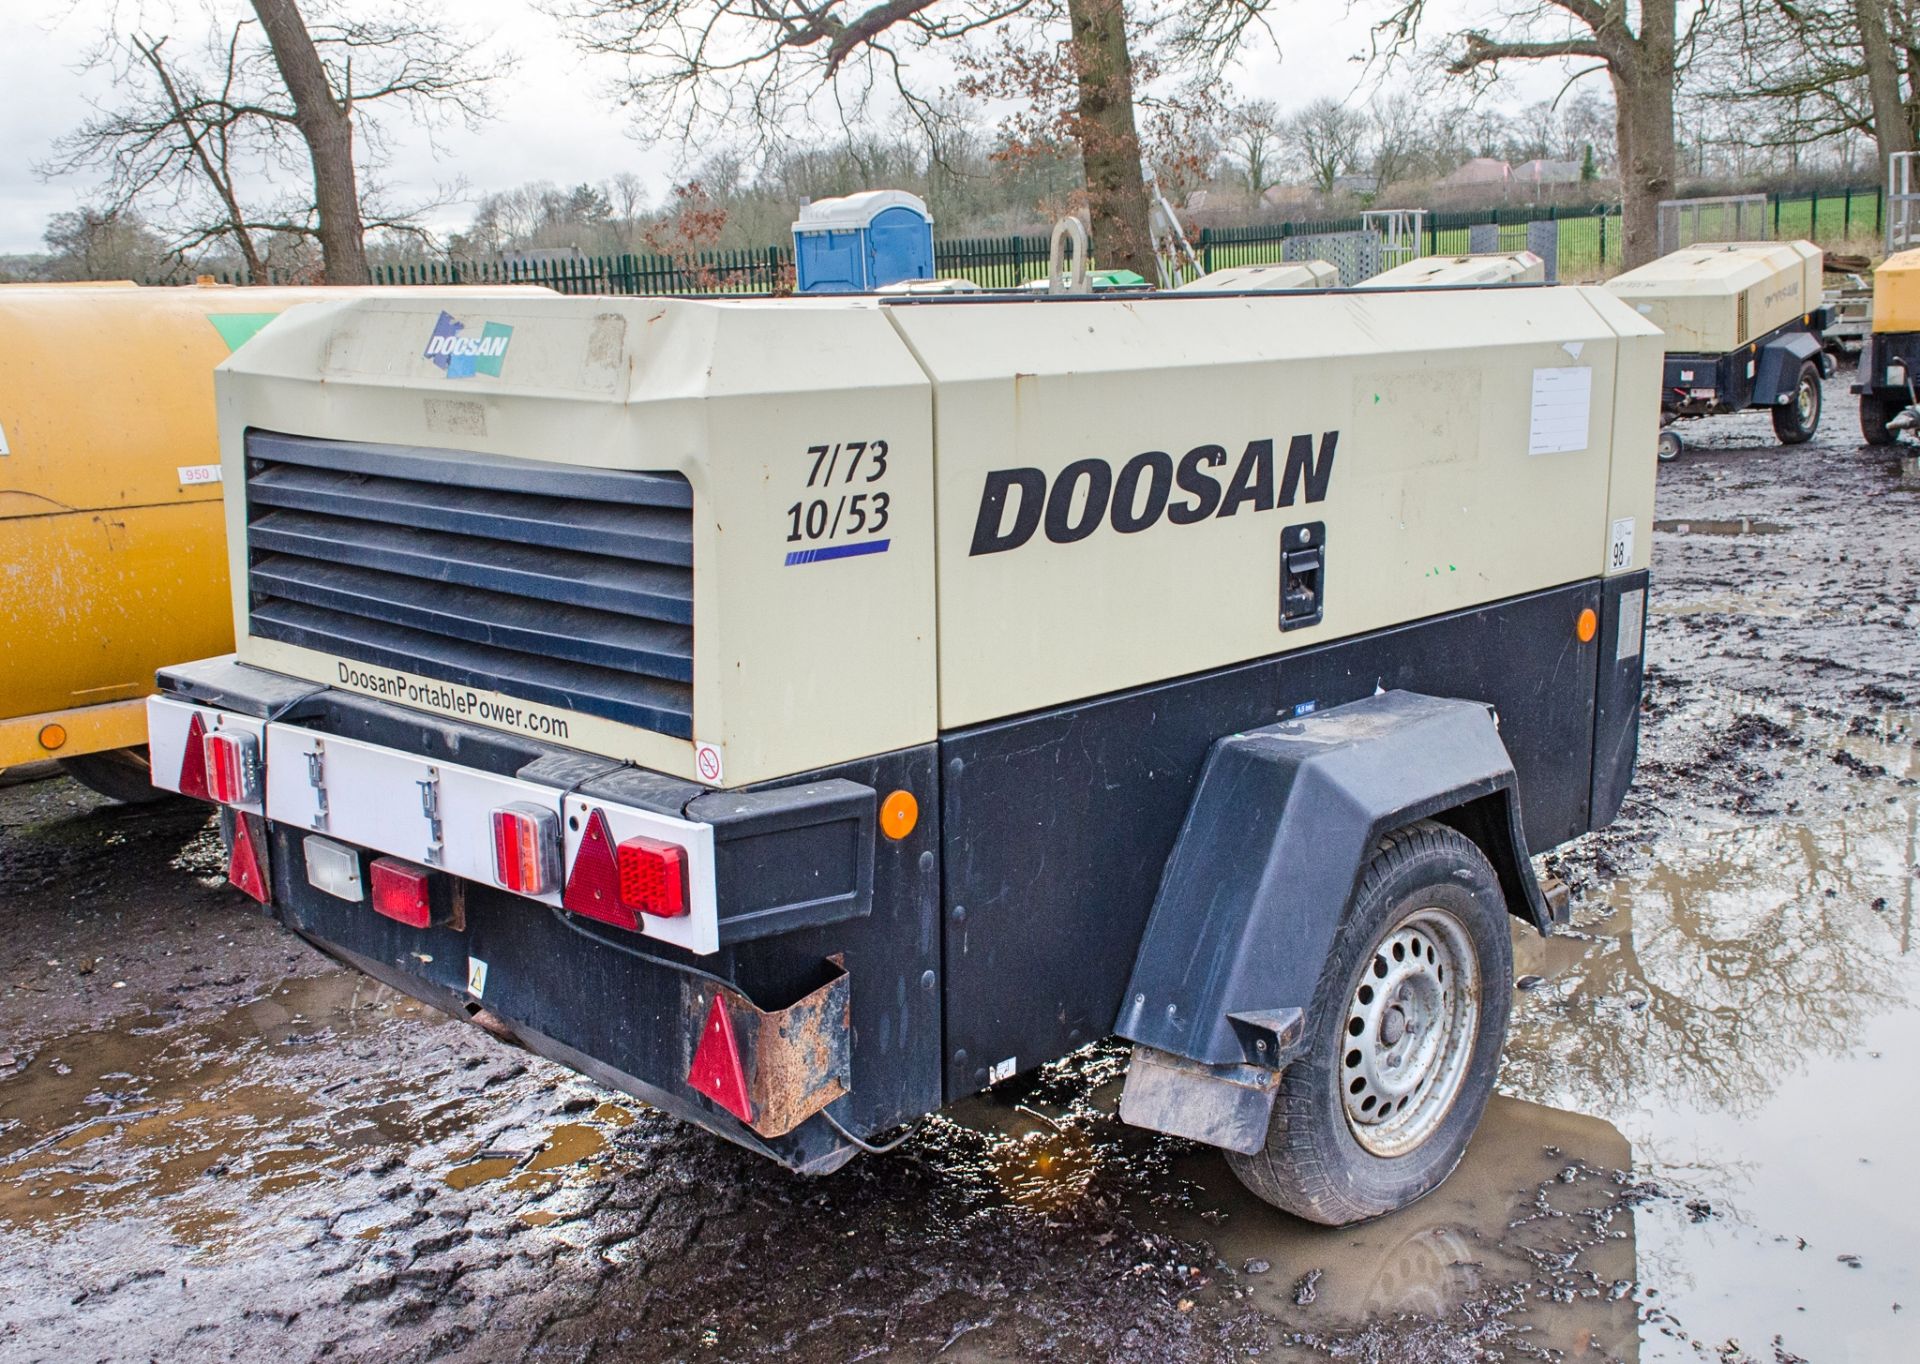 Doosan 7/73 diesel driven fast tow mobile air compressor Year: 2015 S/N: FY543557 Recorded Hours: - Image 2 of 7